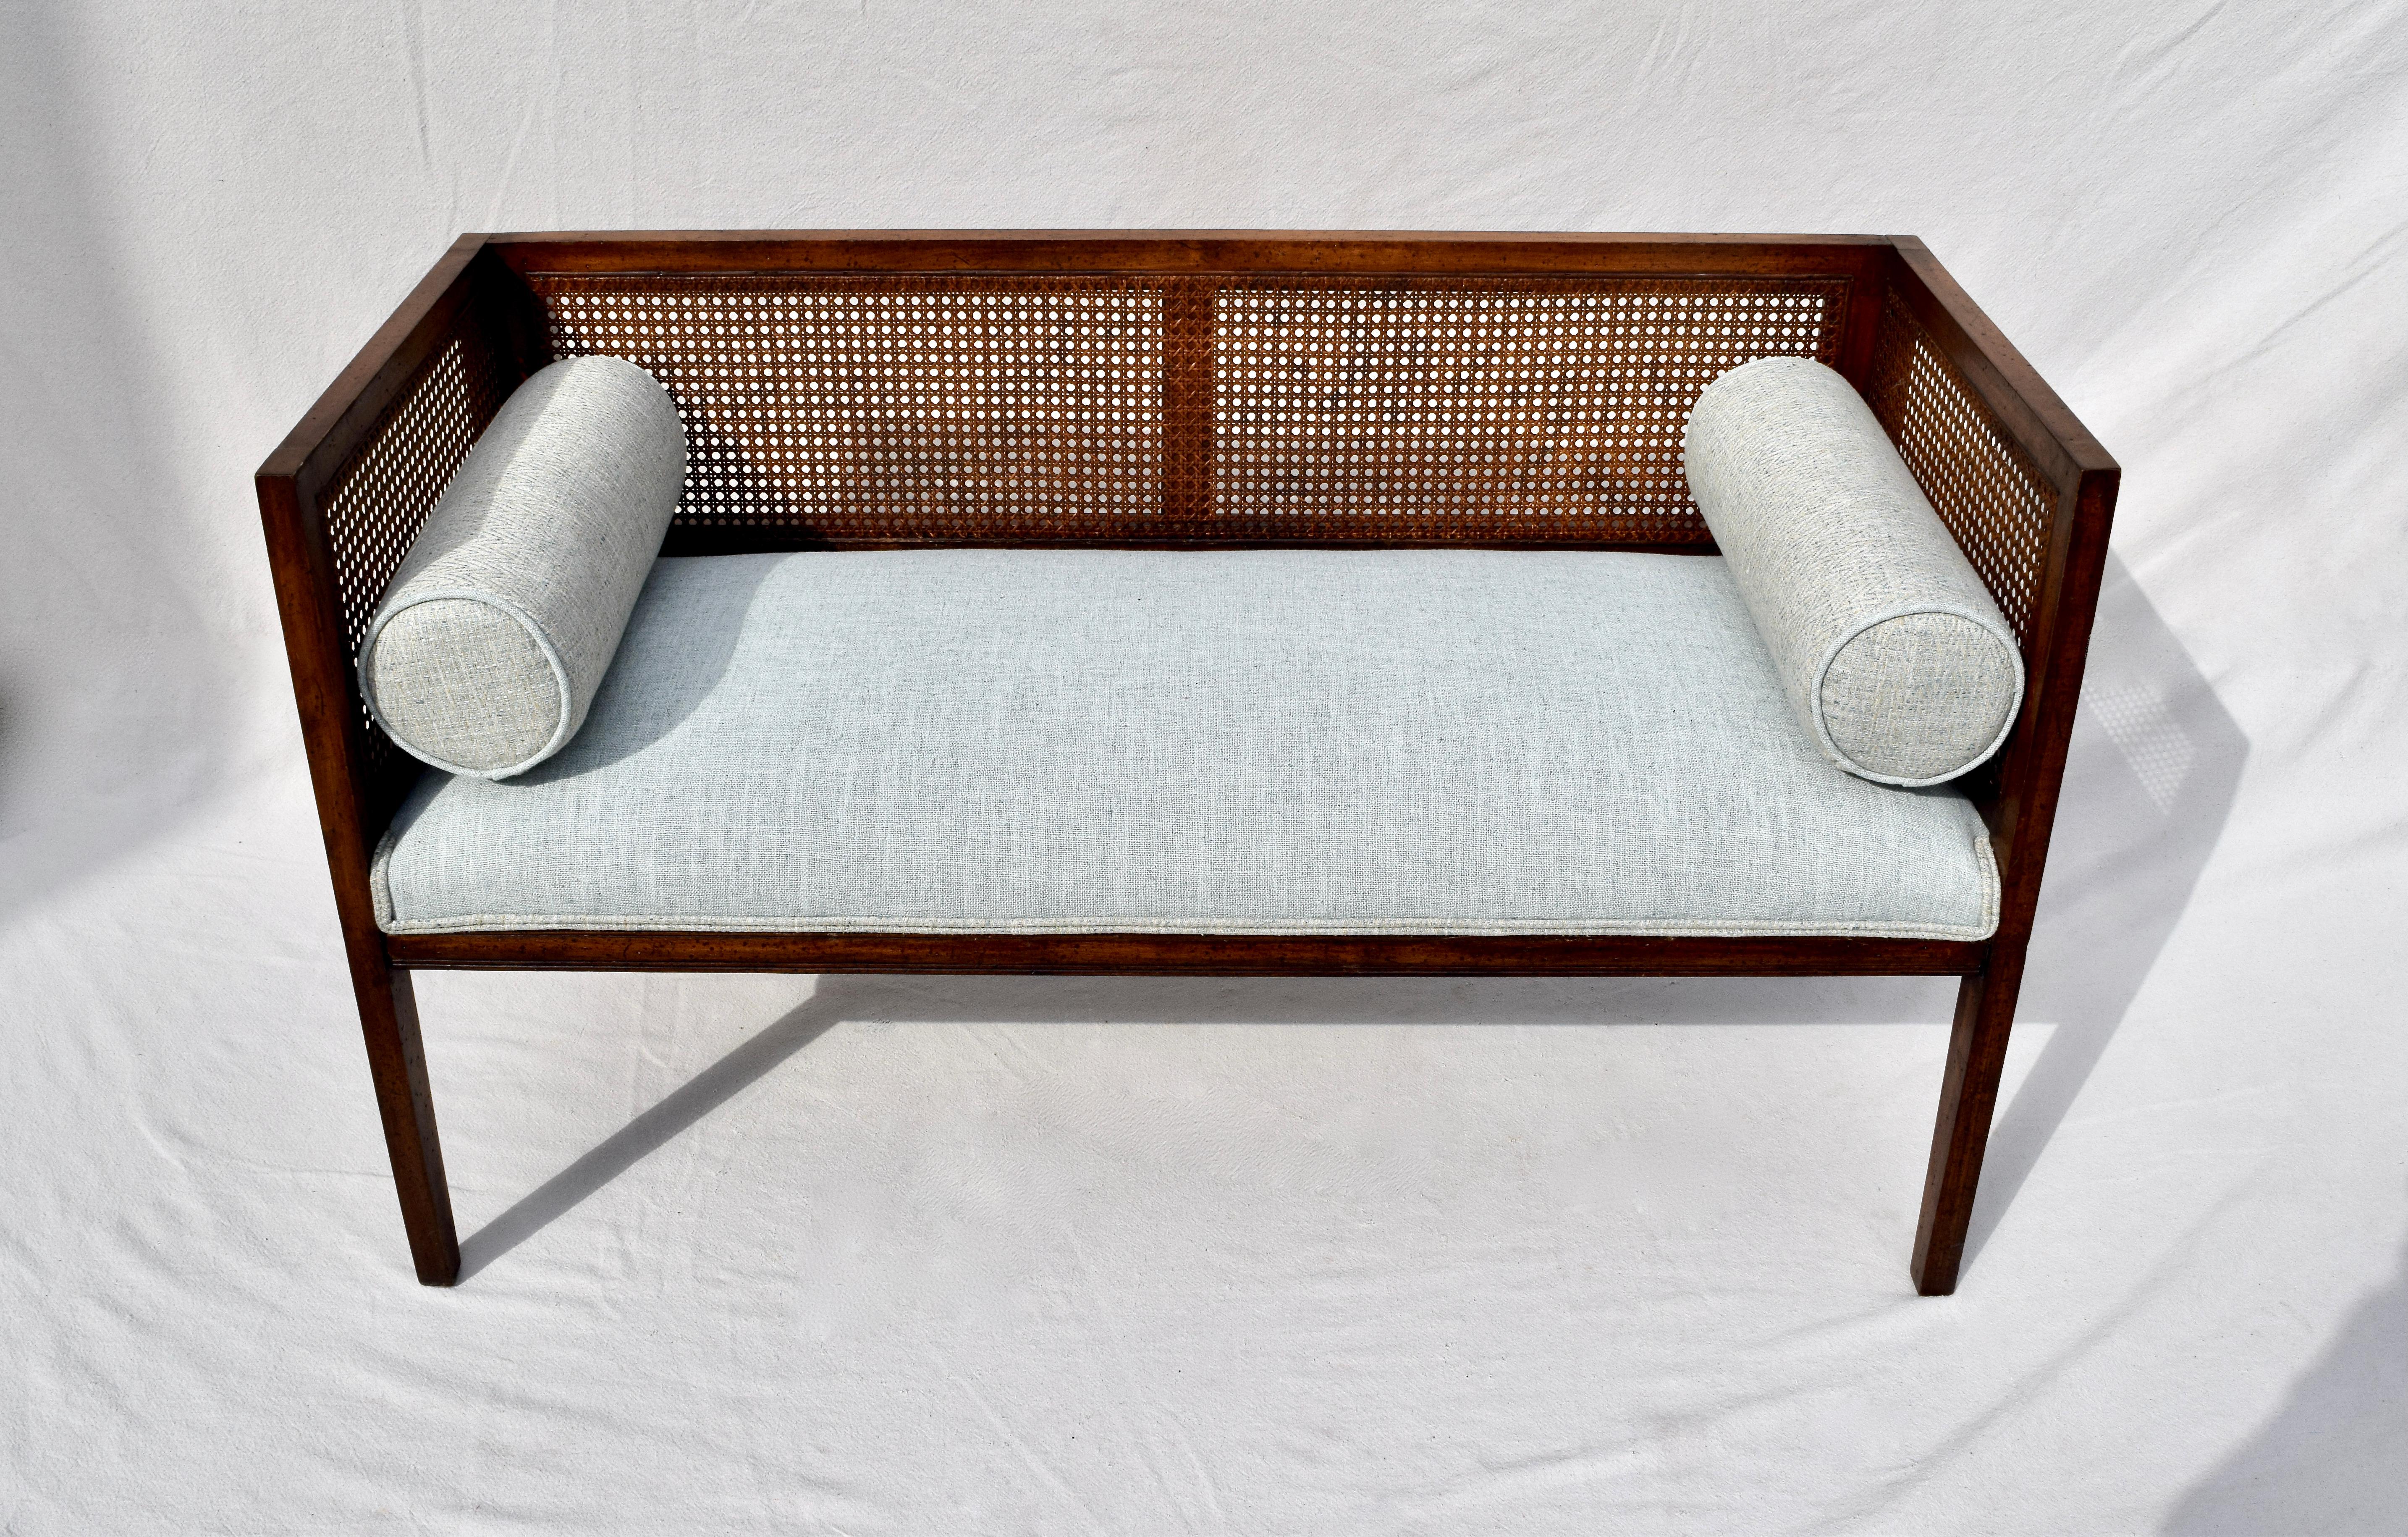 Solid walnut Mid-Century Modern window bench or settee in the manner of Edward Wormley for Dunbar. Beautifully maintained all original caning and finish with warm patina. Restored seat and bolster cushions are upholstered is soft blue linen.